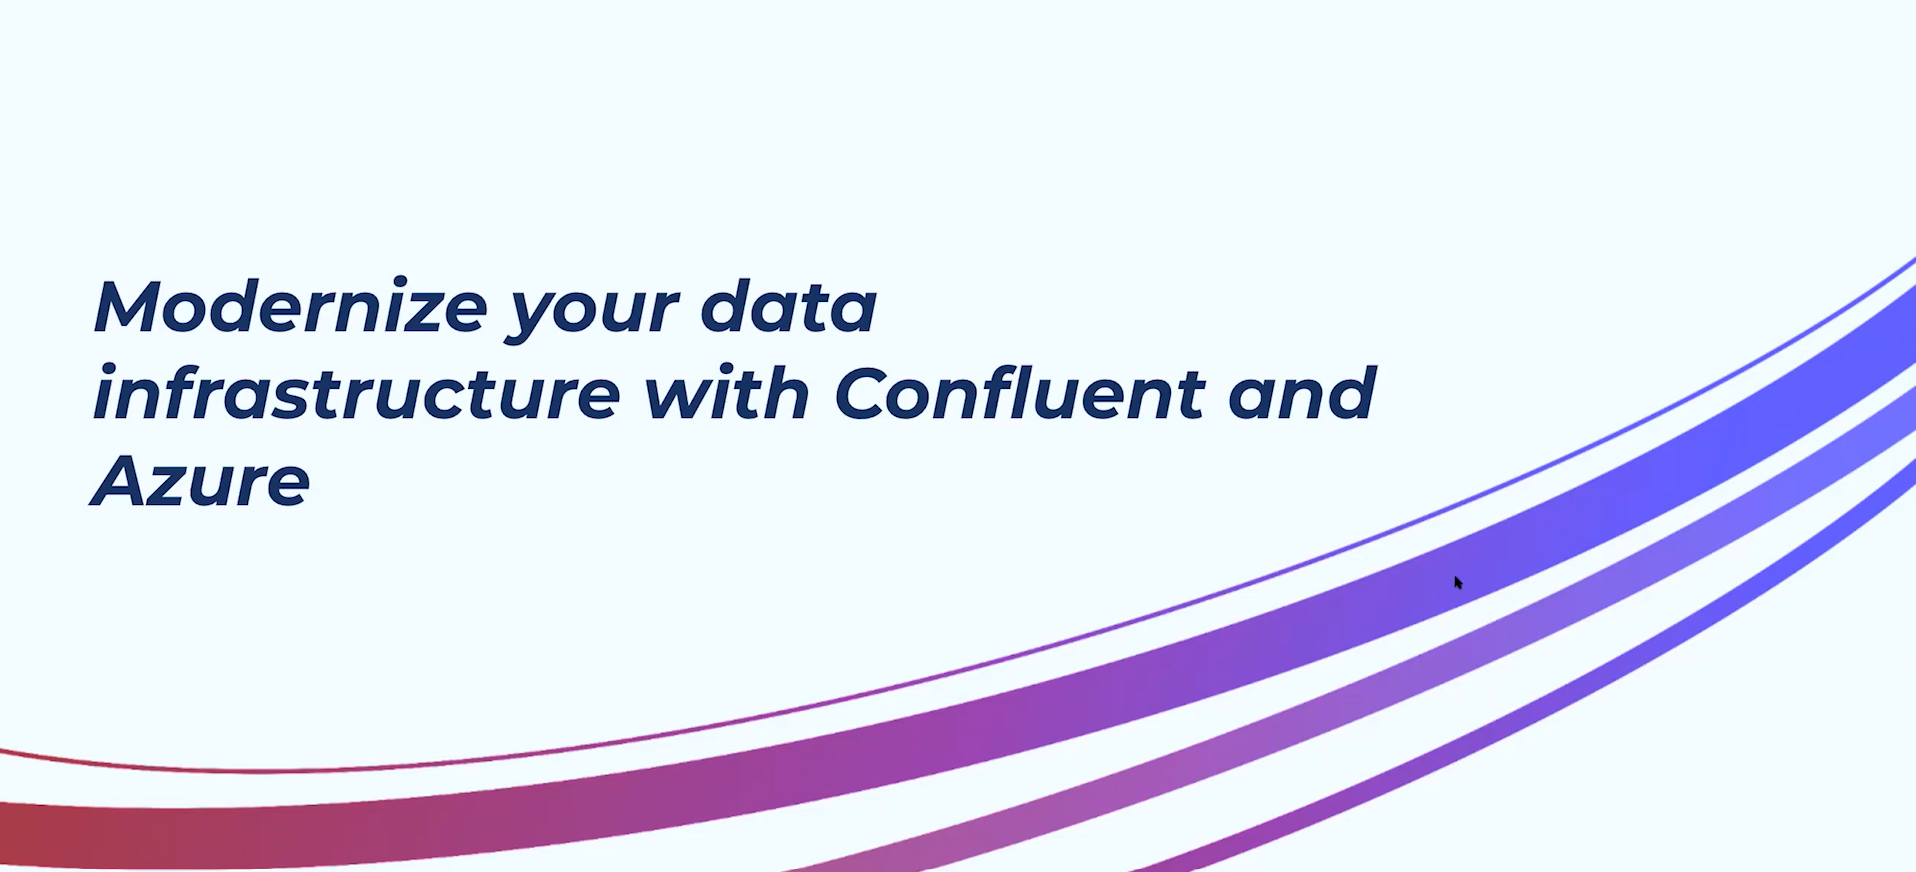 Modernize your real-time data infrastructure with Confluent and Azure